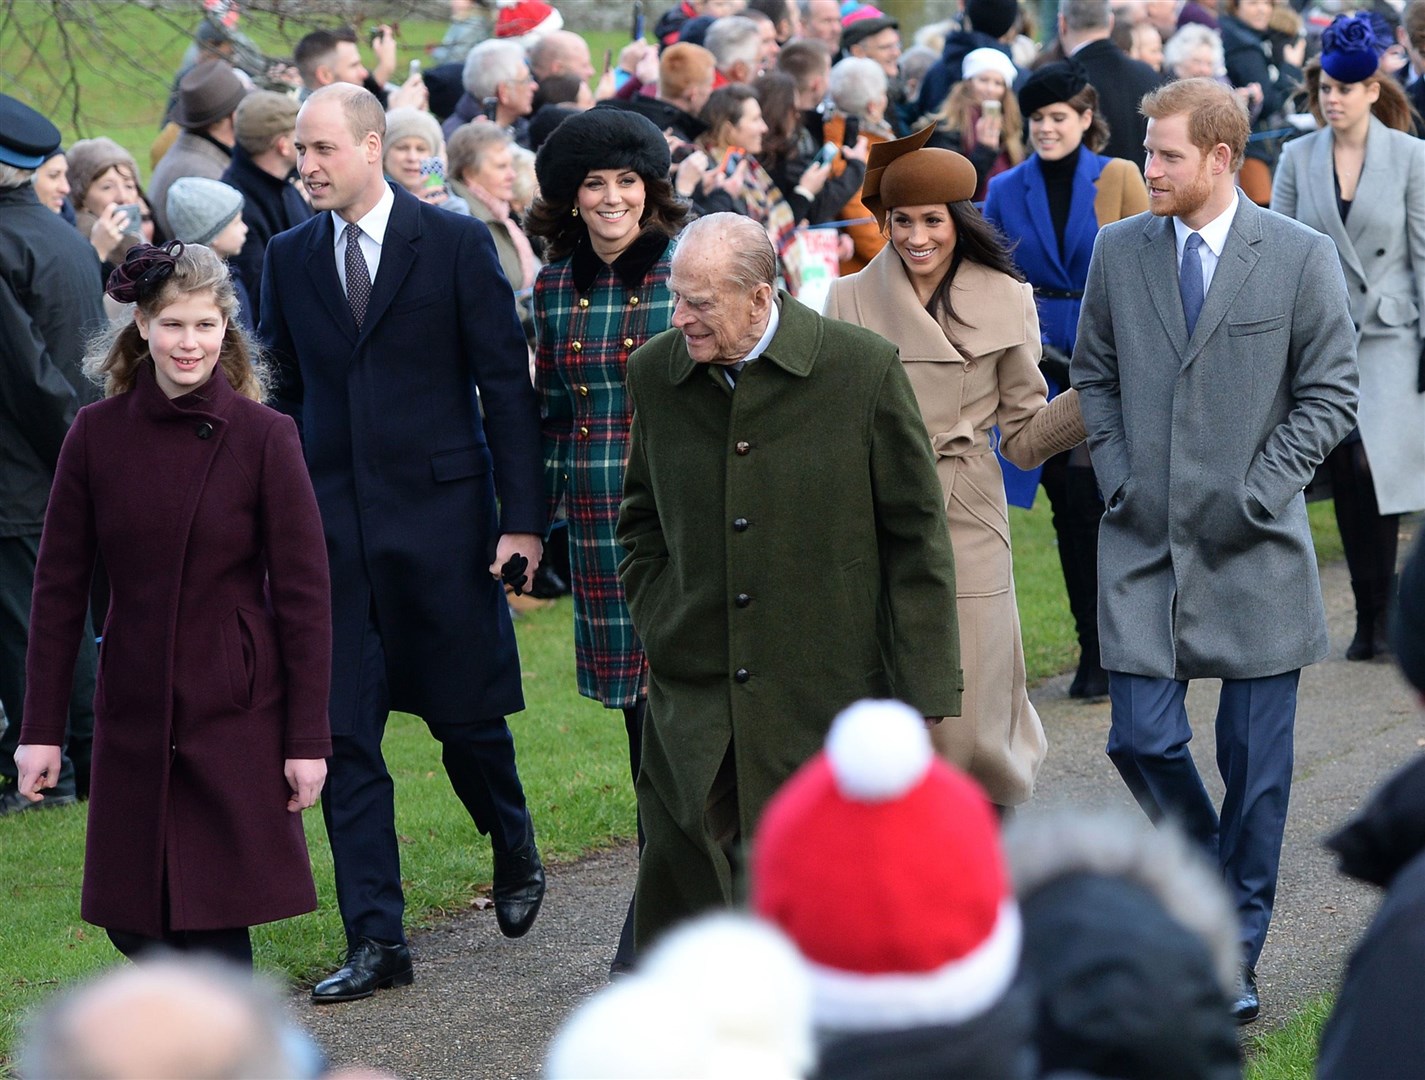 Meghan and Harry joined the Duke of Edinburgh and other family members for Christmas in Sandringham before they married (PA)